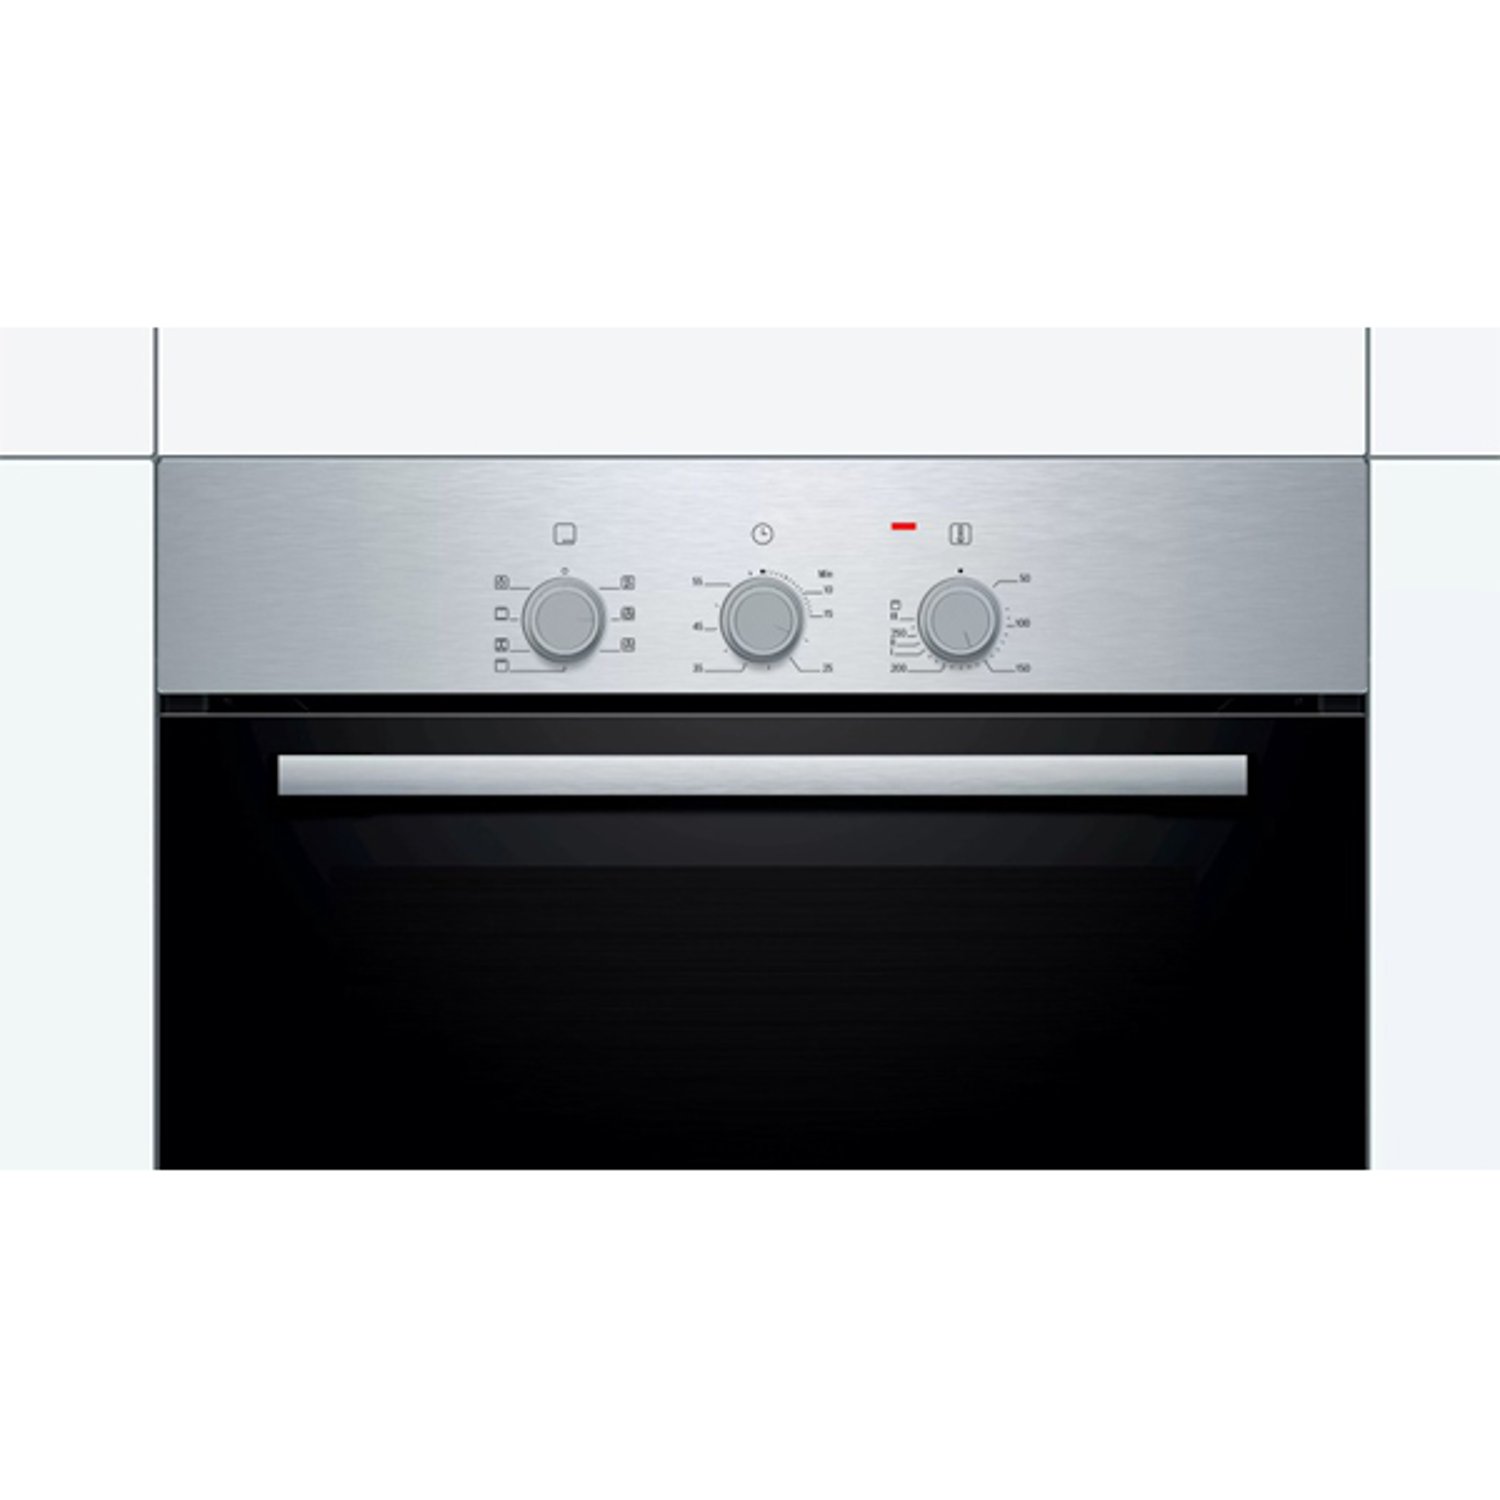 Bosch Built-In Microwave Oven Model HBF011BR1M